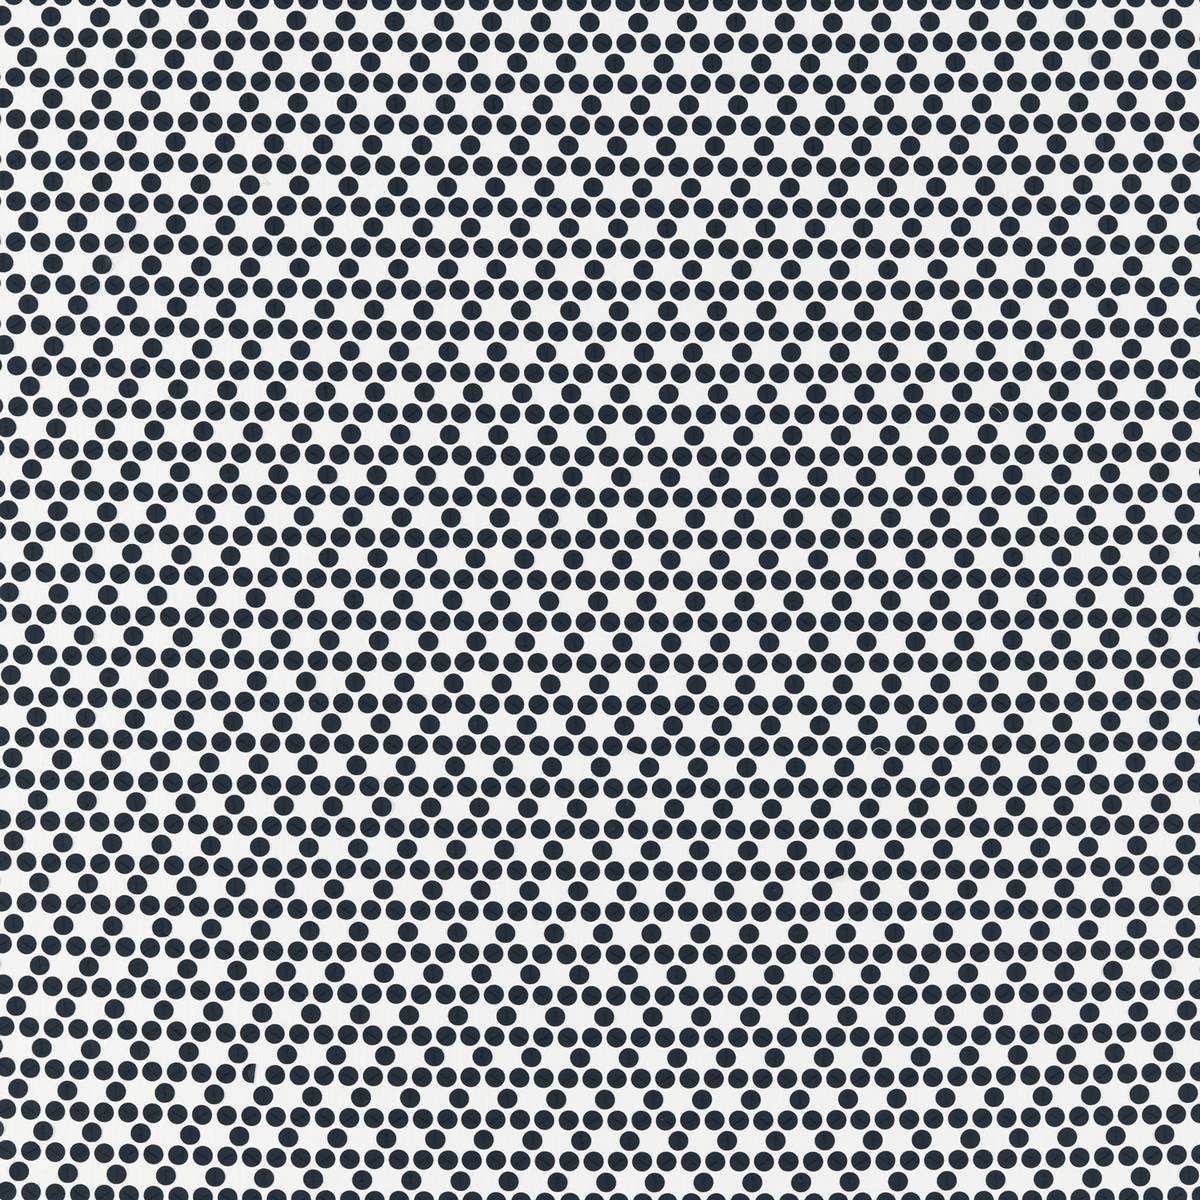 Lunette Domino Fabric by Harlequin